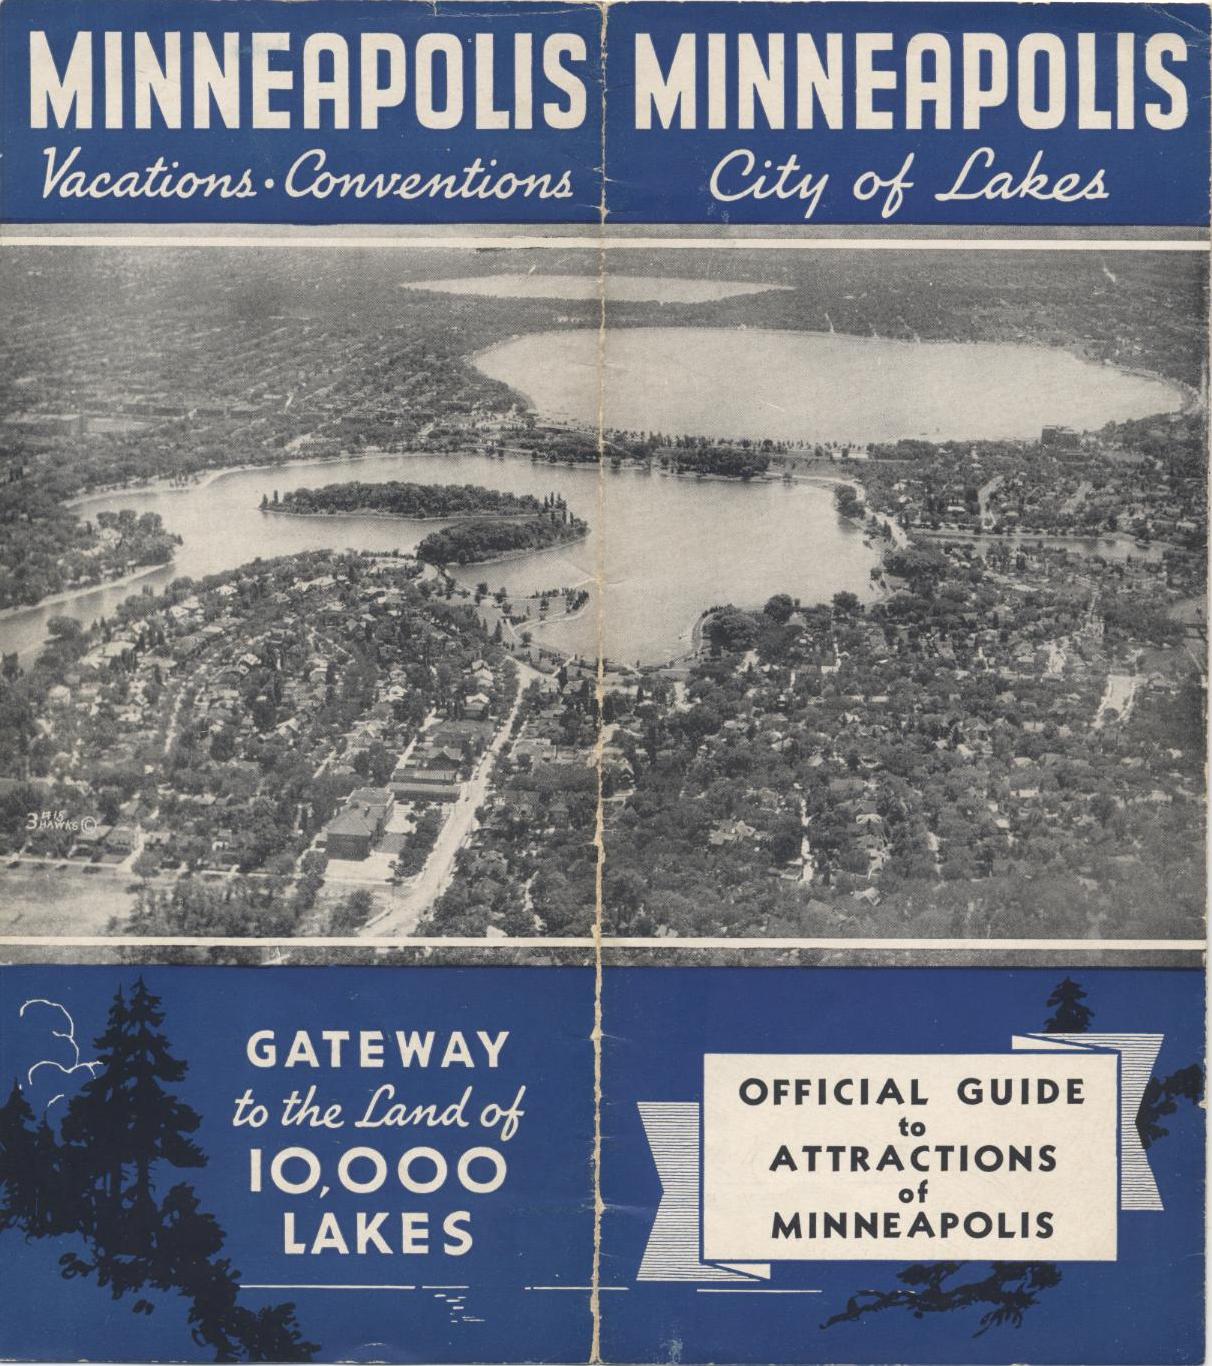 Official Guide to Minneapolis (1930's)A